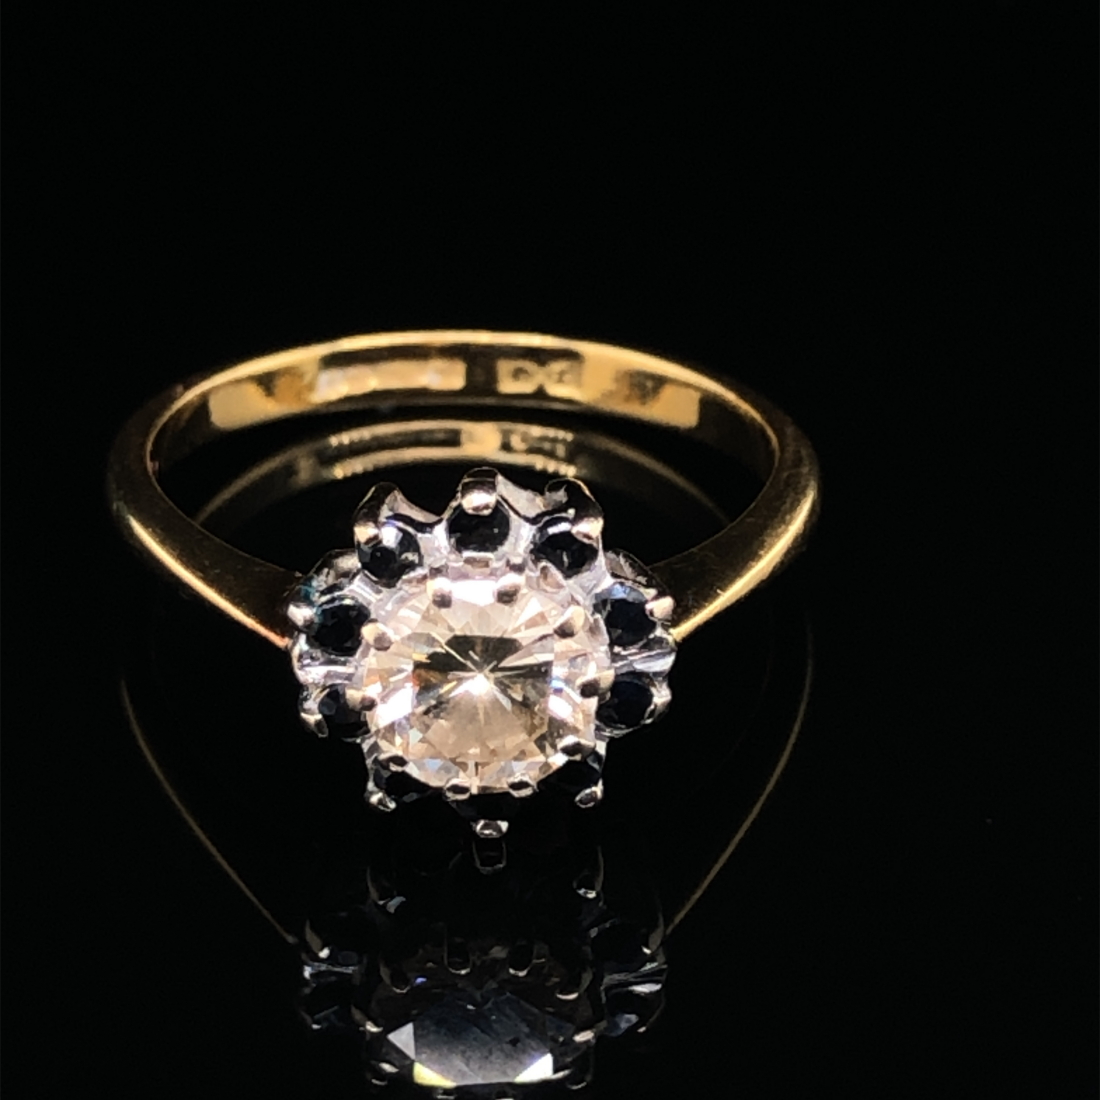 A DIAMOND AND SAPPHIRE ROUND CLUSTER RING. THE CENTRE DIAMOND A ROUND BRILLIANT CUT, ASSESSED - Image 7 of 10